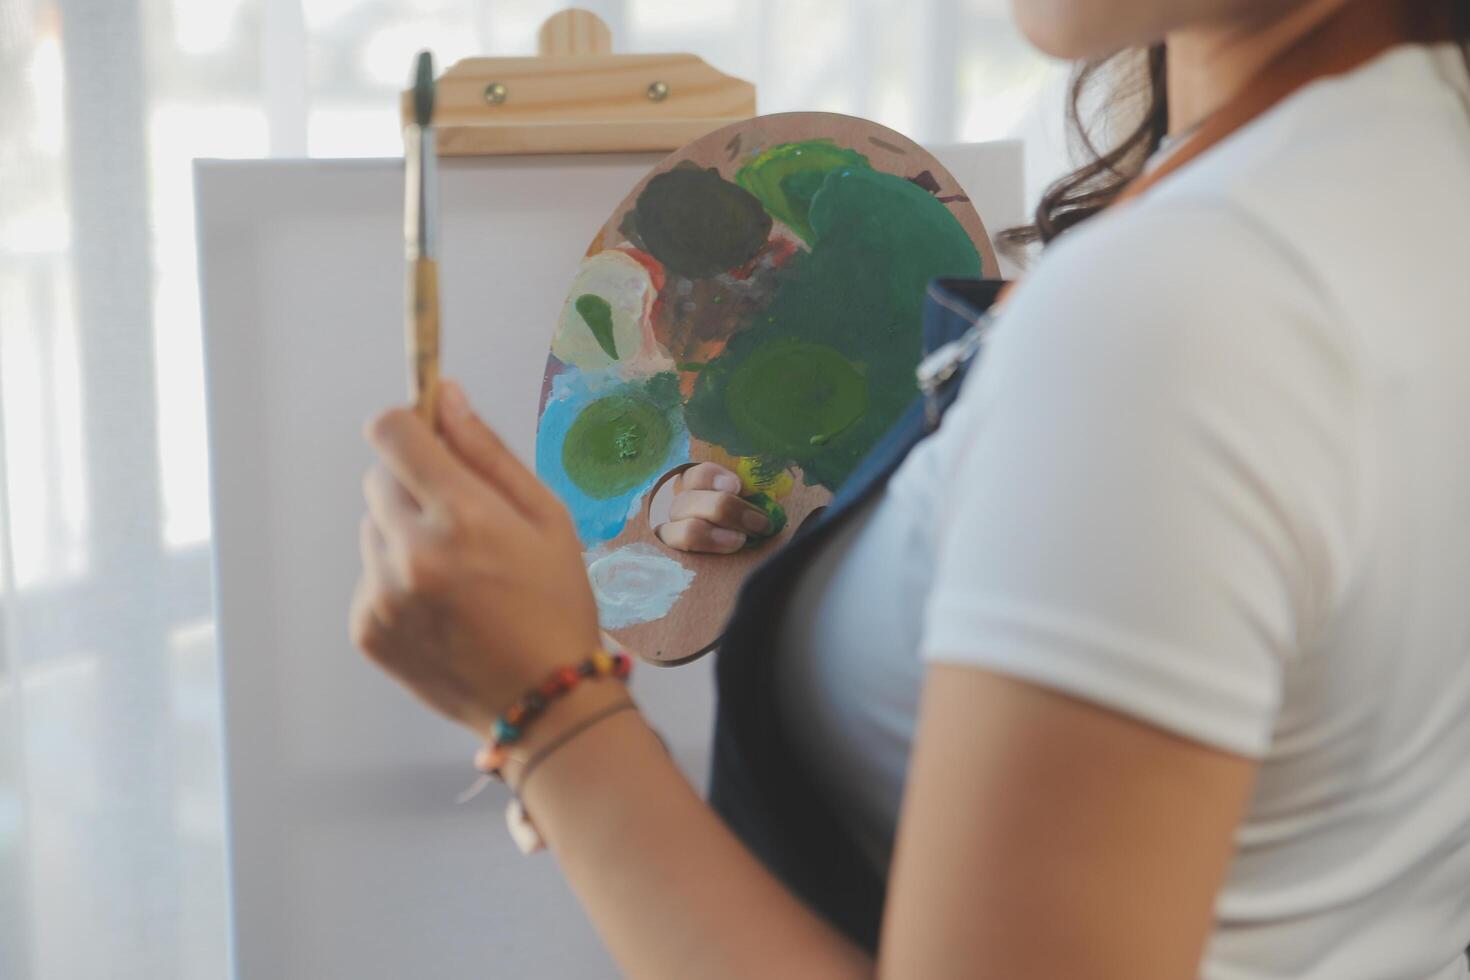 Cropped image of female artist standing in front of an easel and dipping brush into color palette photo